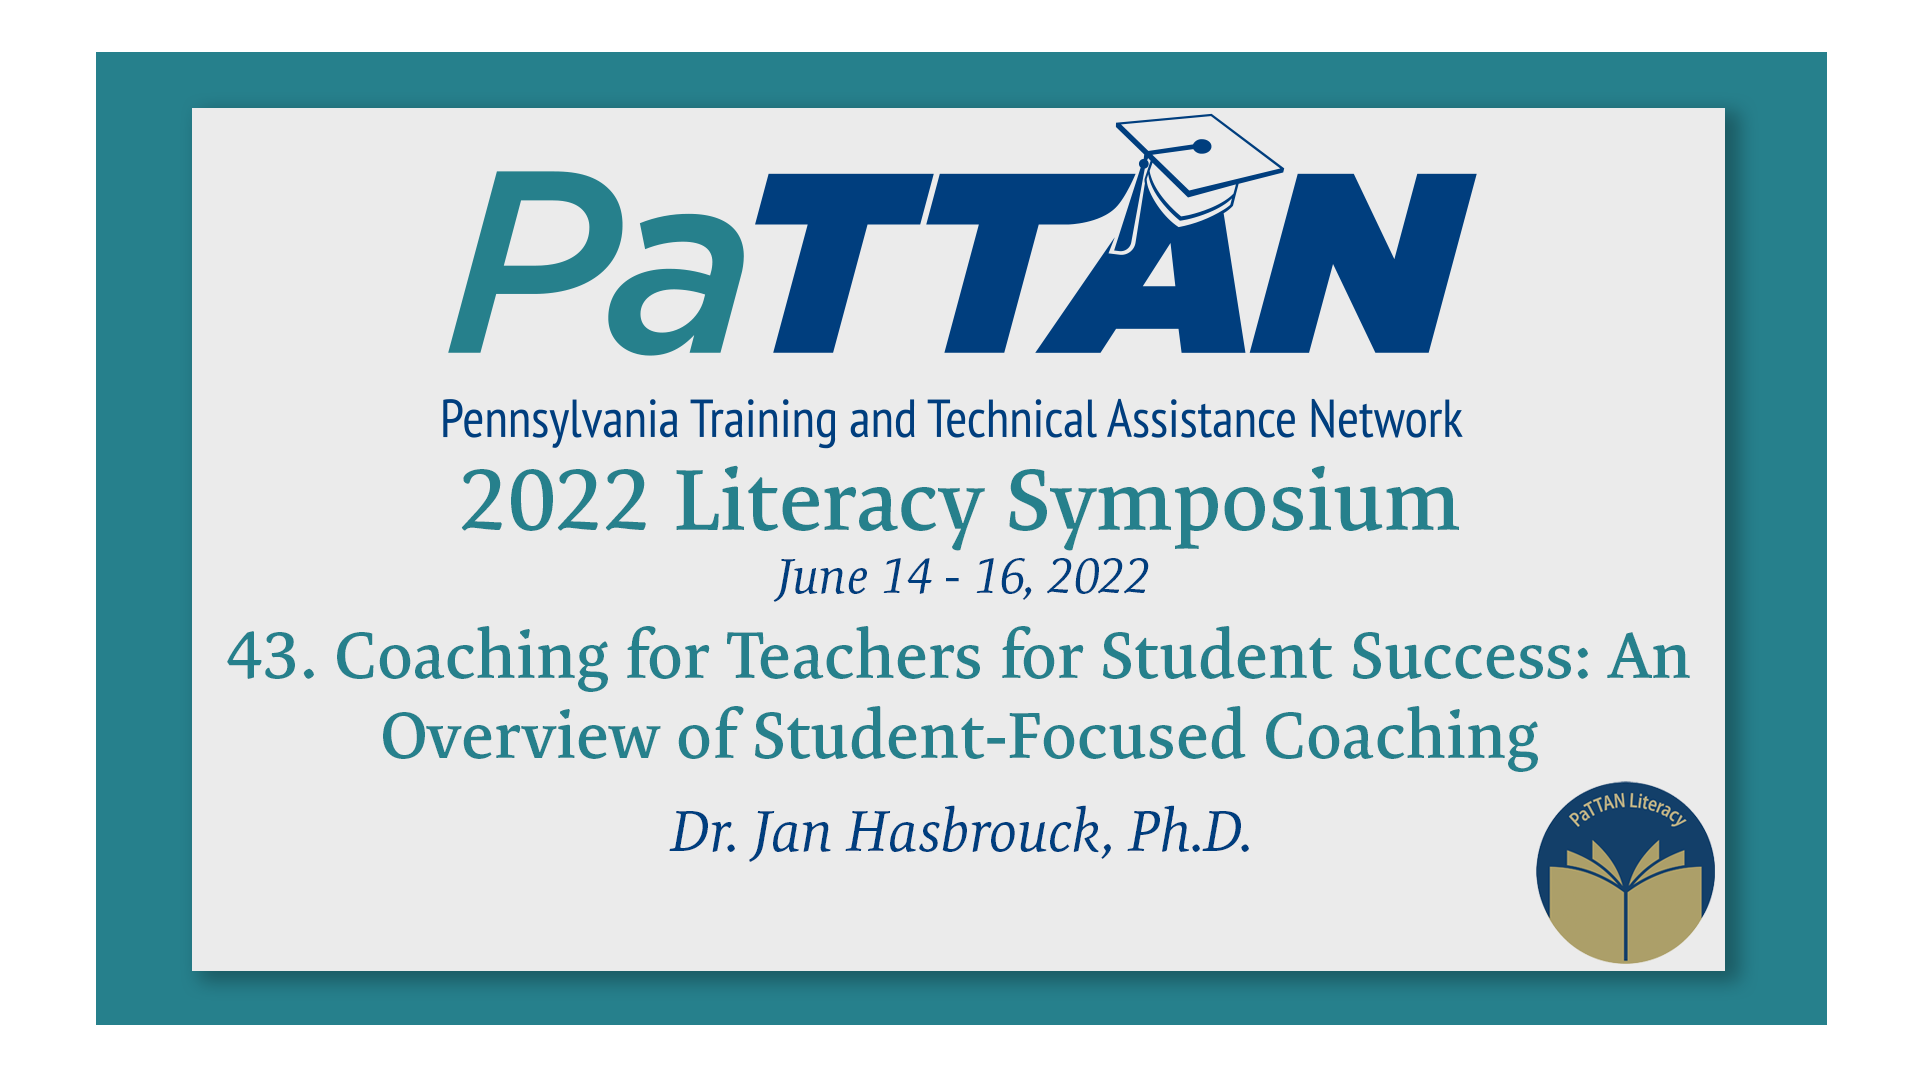 43. Coaching for Teachers for Student Success | 2022 Literacy Symposium